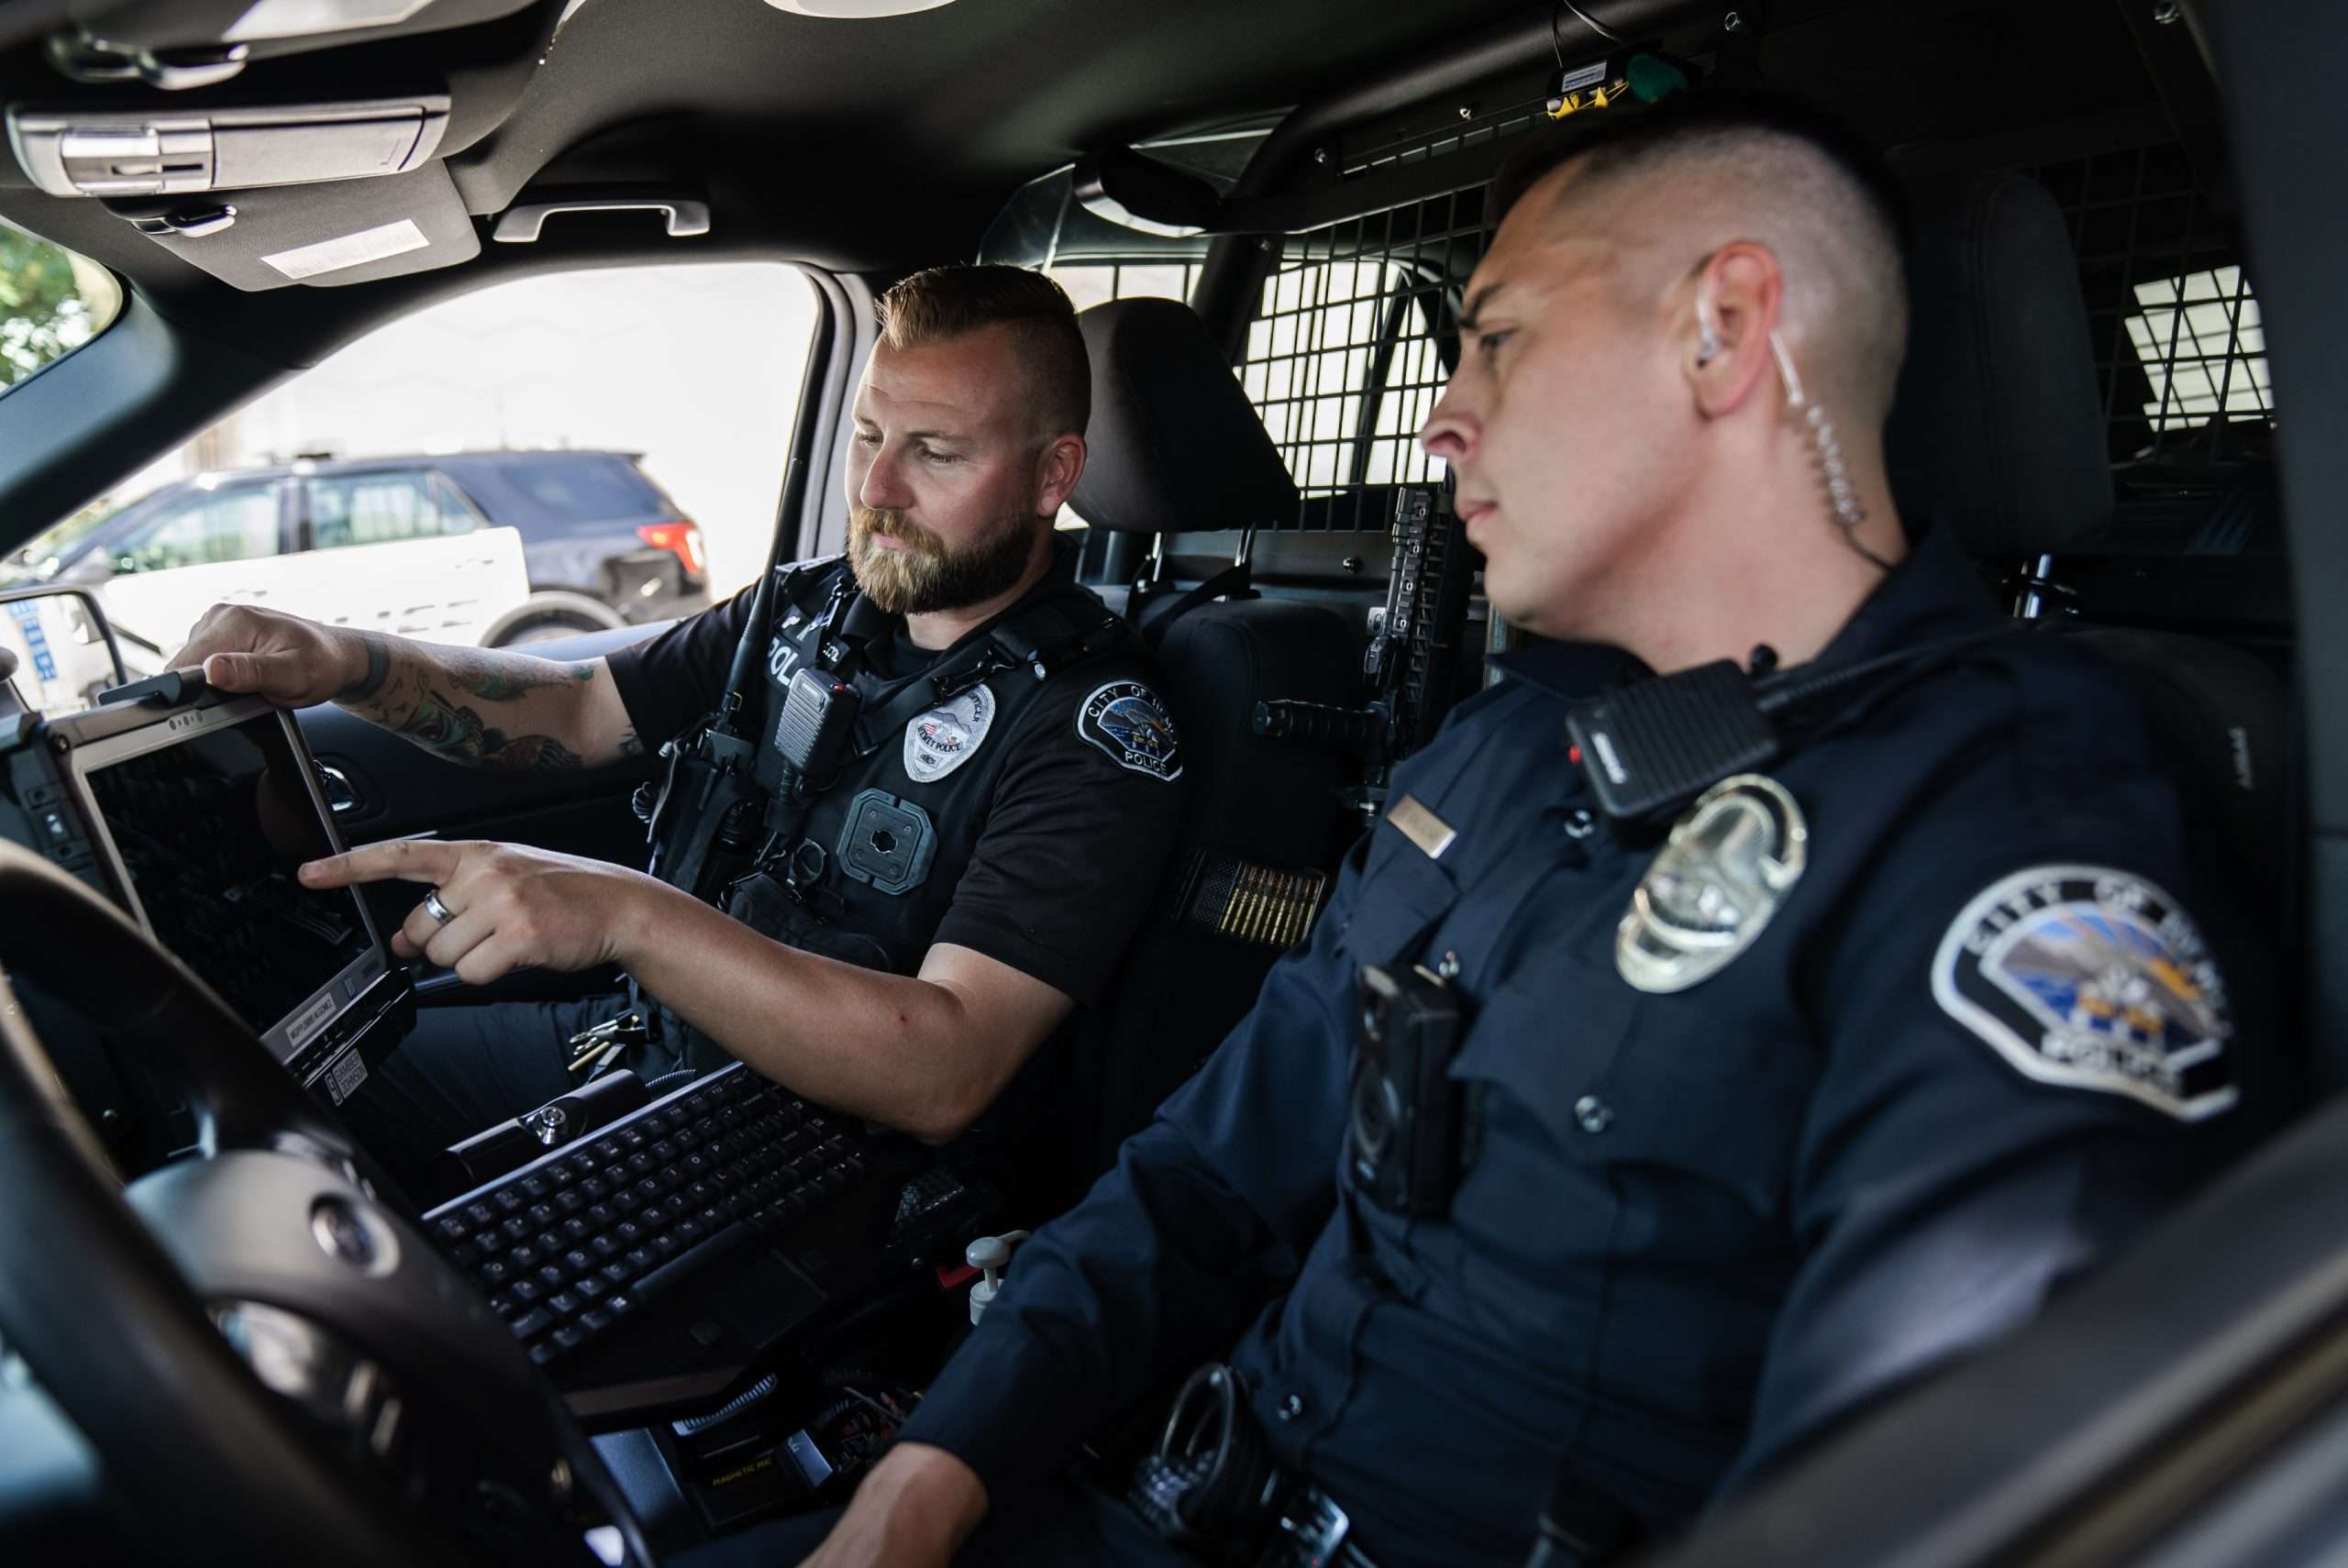 A Hemet Police Training Officer discusses a call with an officer